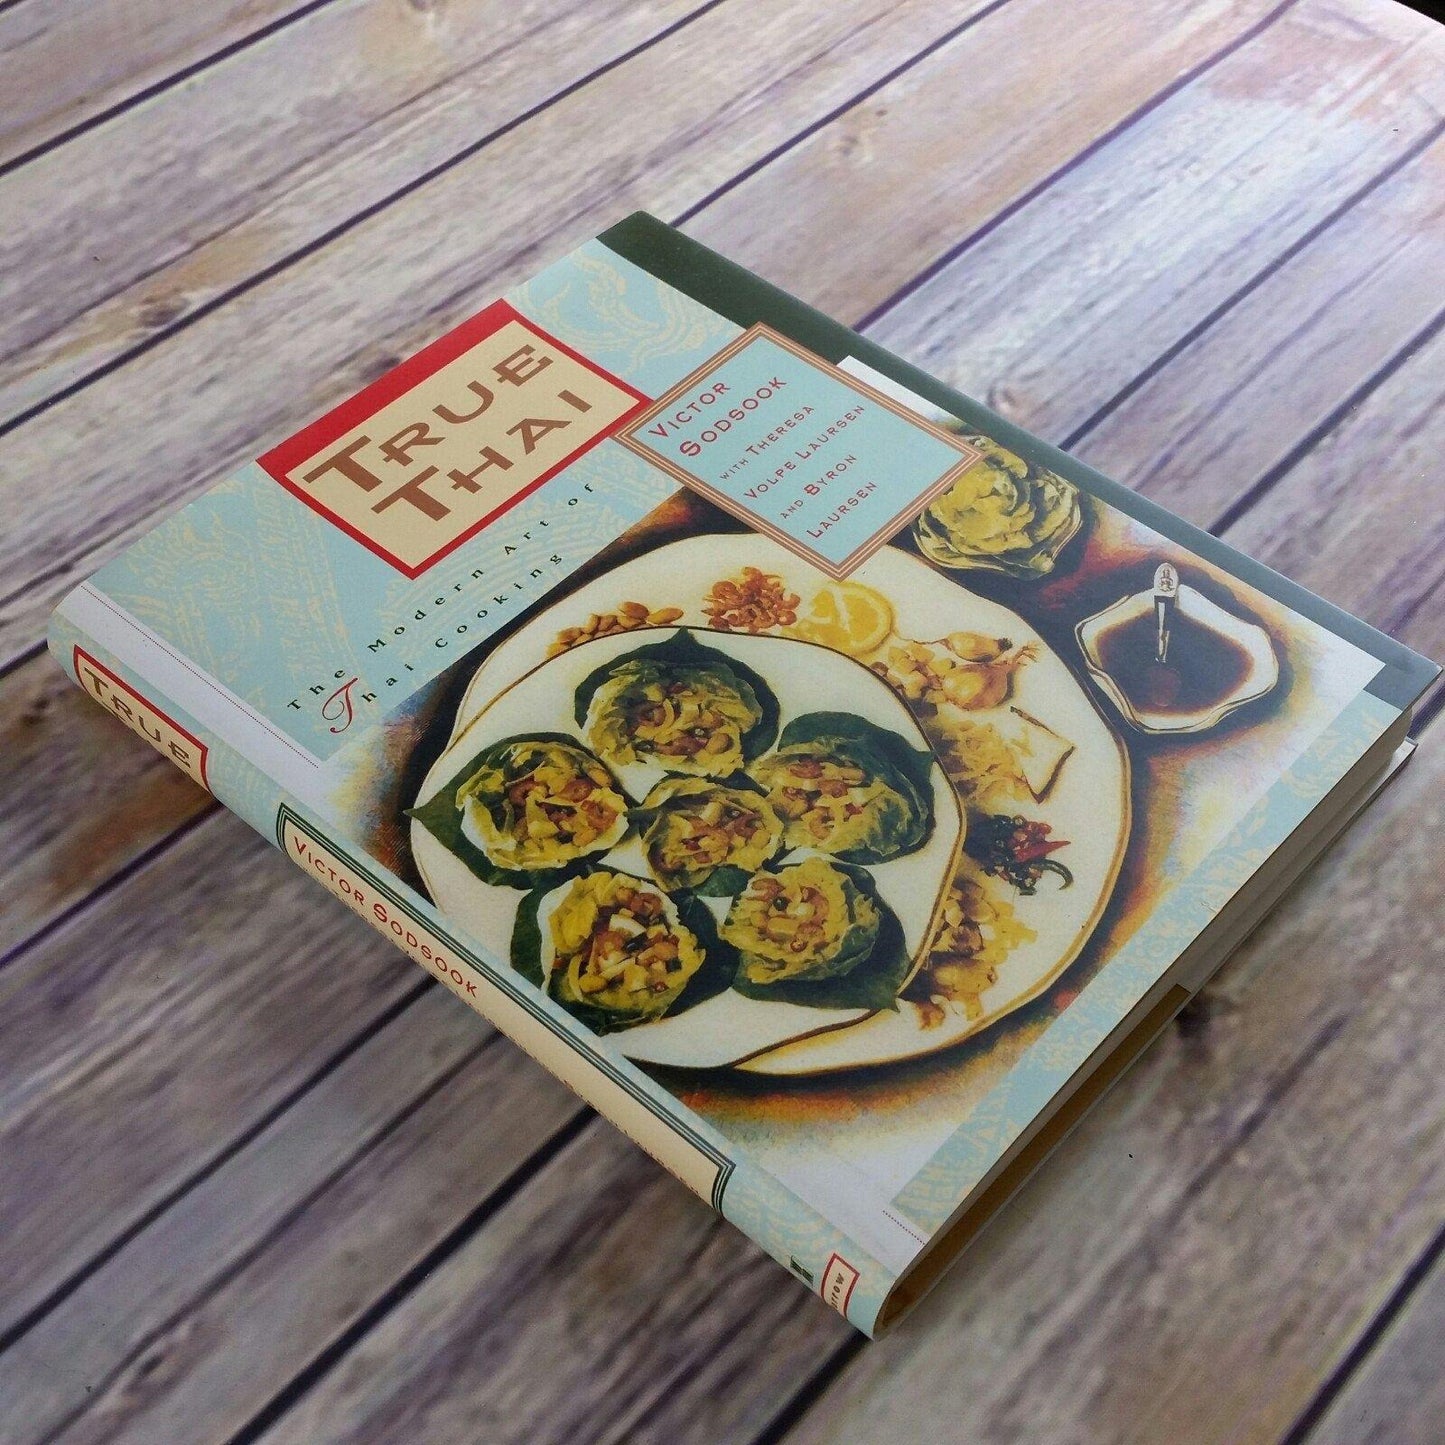 Vintage Cookbook True Thai Recipes 1995 The Modern Art of Thai Cooking Victor Sodsook Hardcover with Dust Jacket